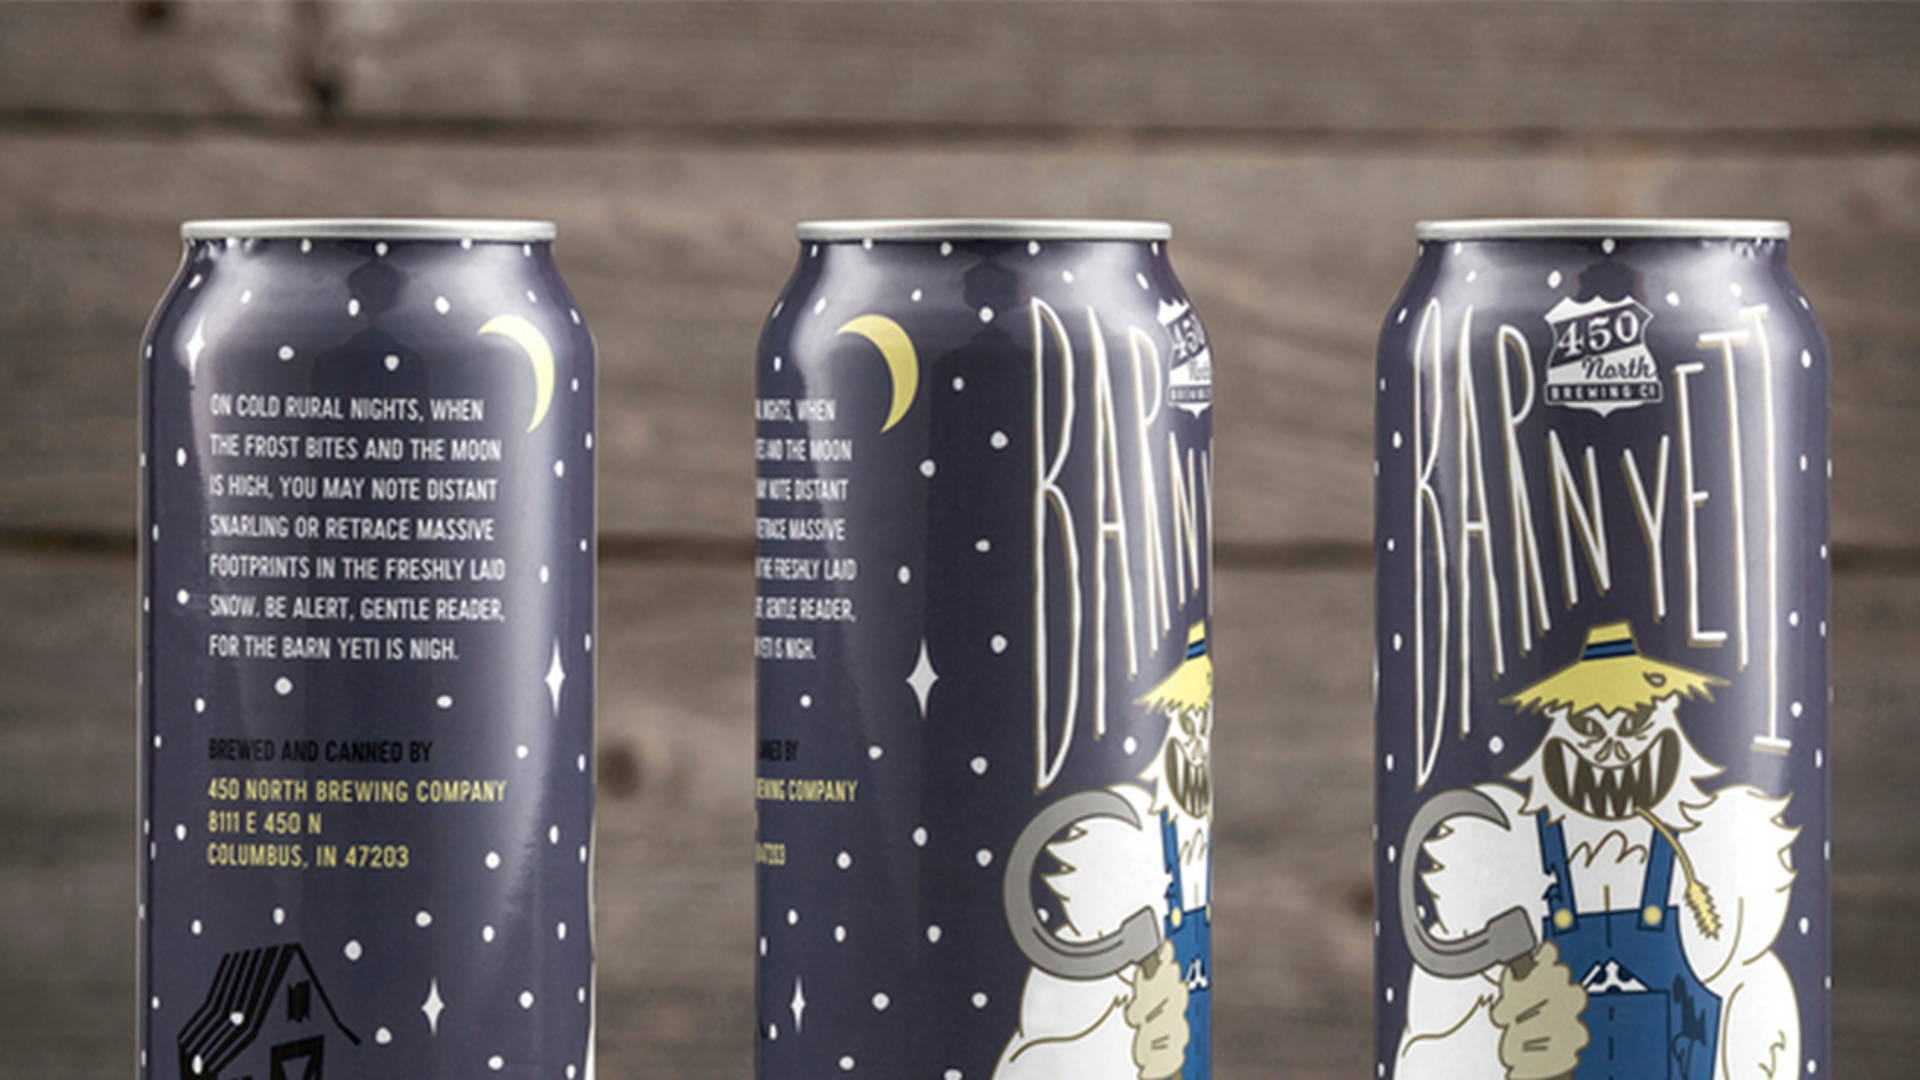 Featured image for 450 North Brewing Co.'s Specialty Cans